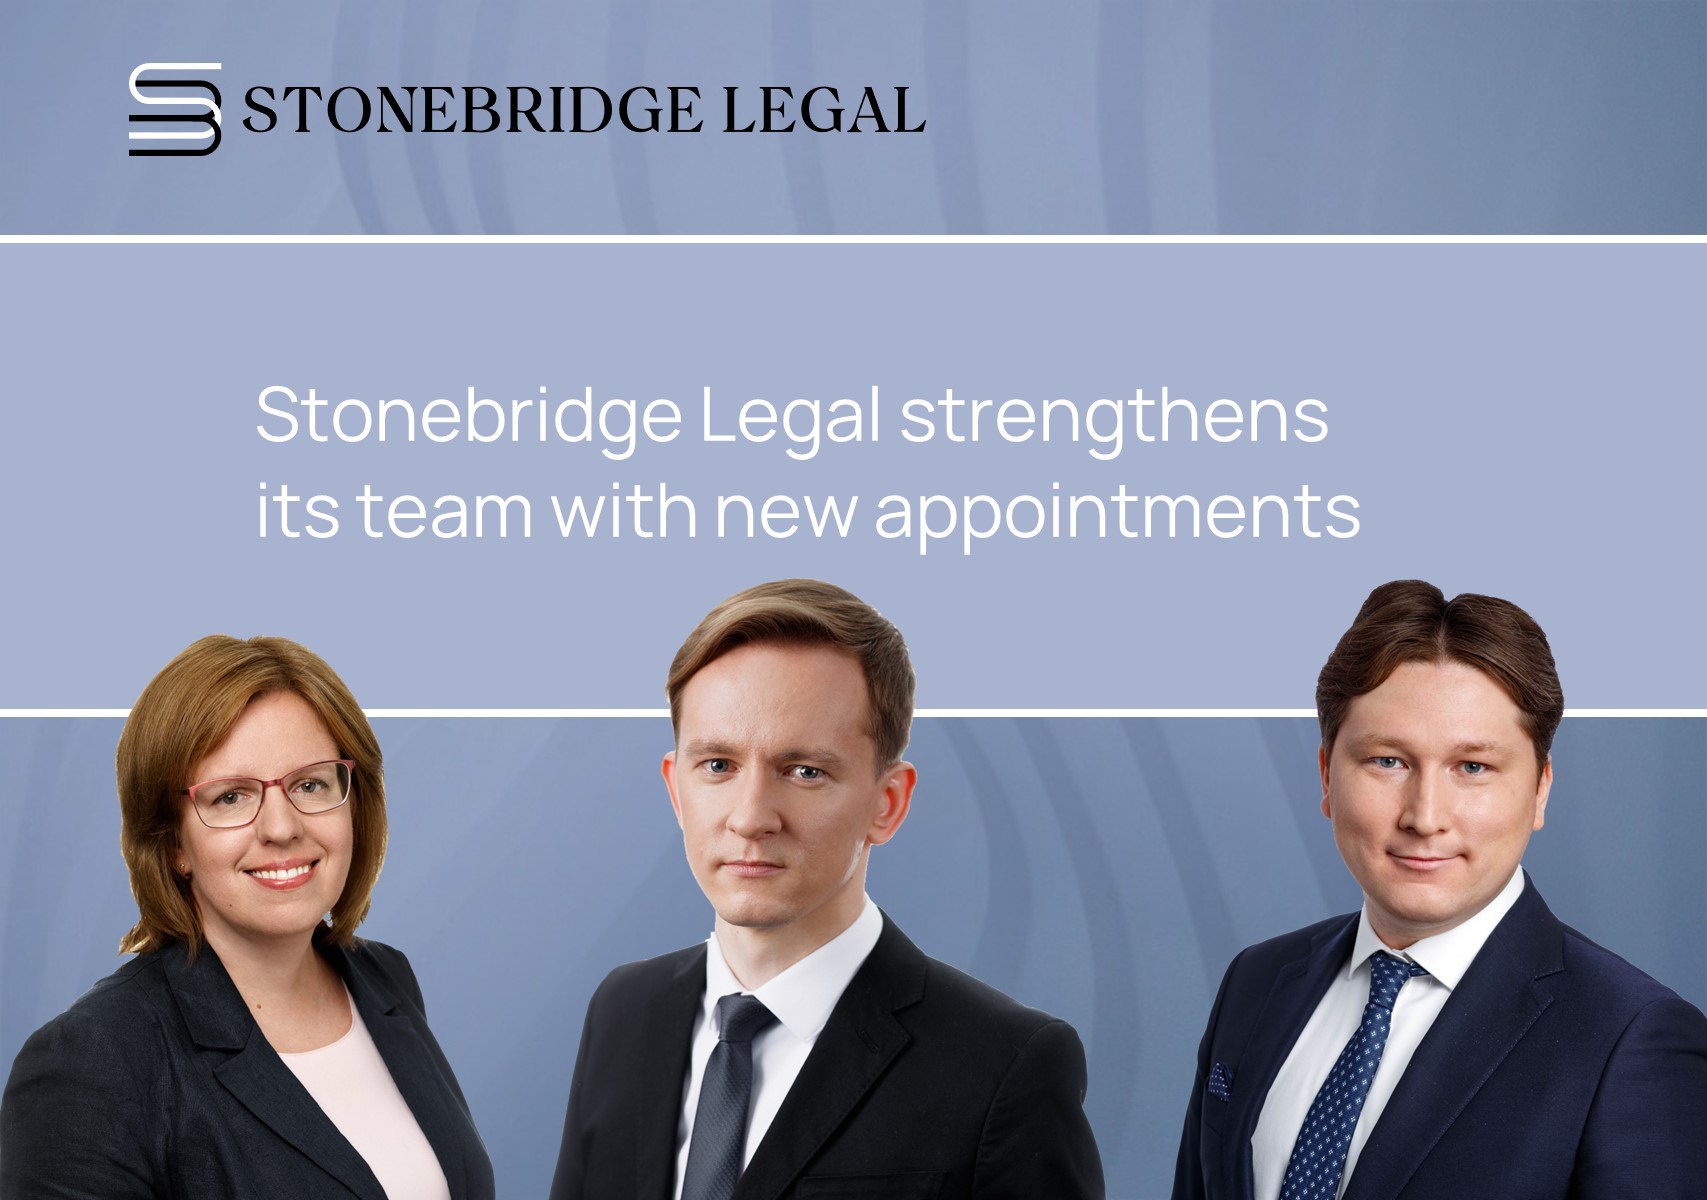 Stonebridge Legal strengthens its team with new appointments